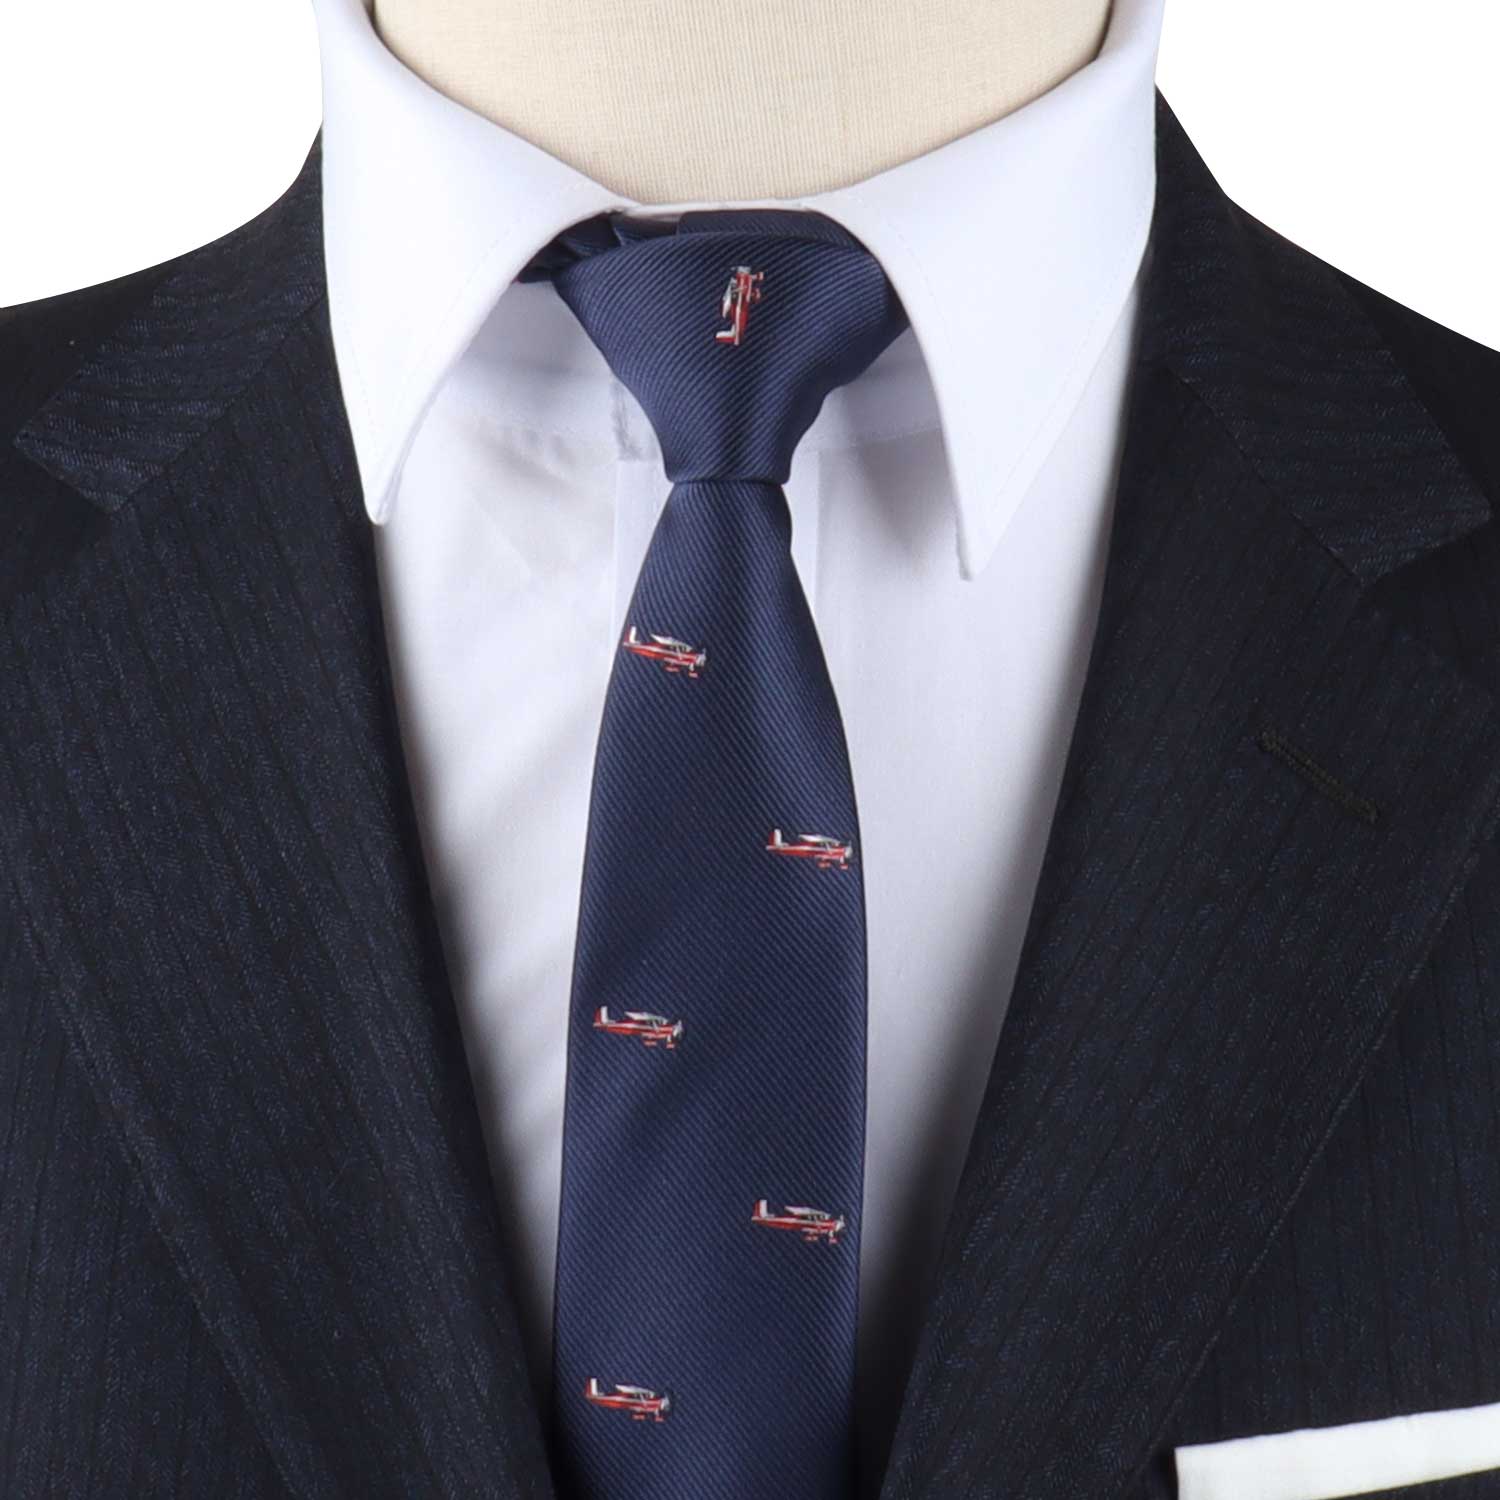 A timeless mannequin dressed in a fashion suit with a Classic Aircraft Skinny Tie.